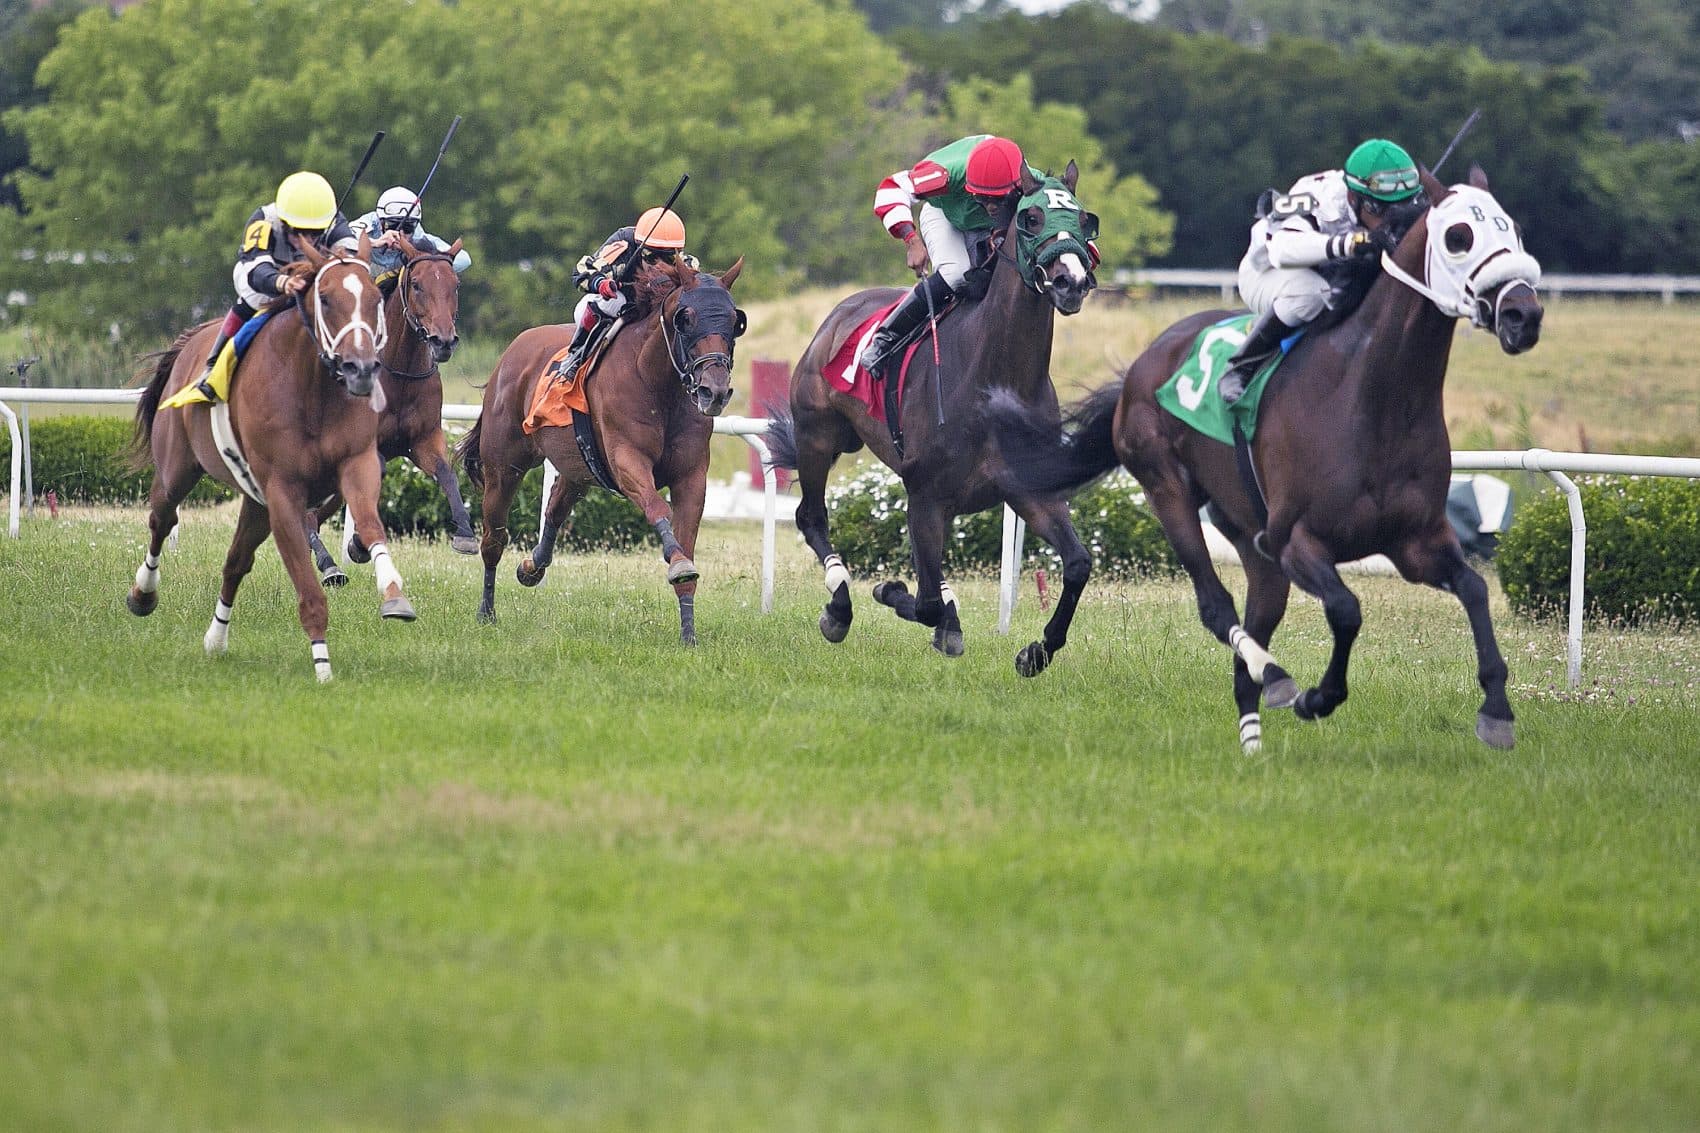 Horse racing at Suffolk Downs on July 9, one of only six days scheduled this year. Facing a drop-off in gambling, Suffolk Downs has announced plans to redevelop the track. (Courtesy of Lauren Owens/The Eye)